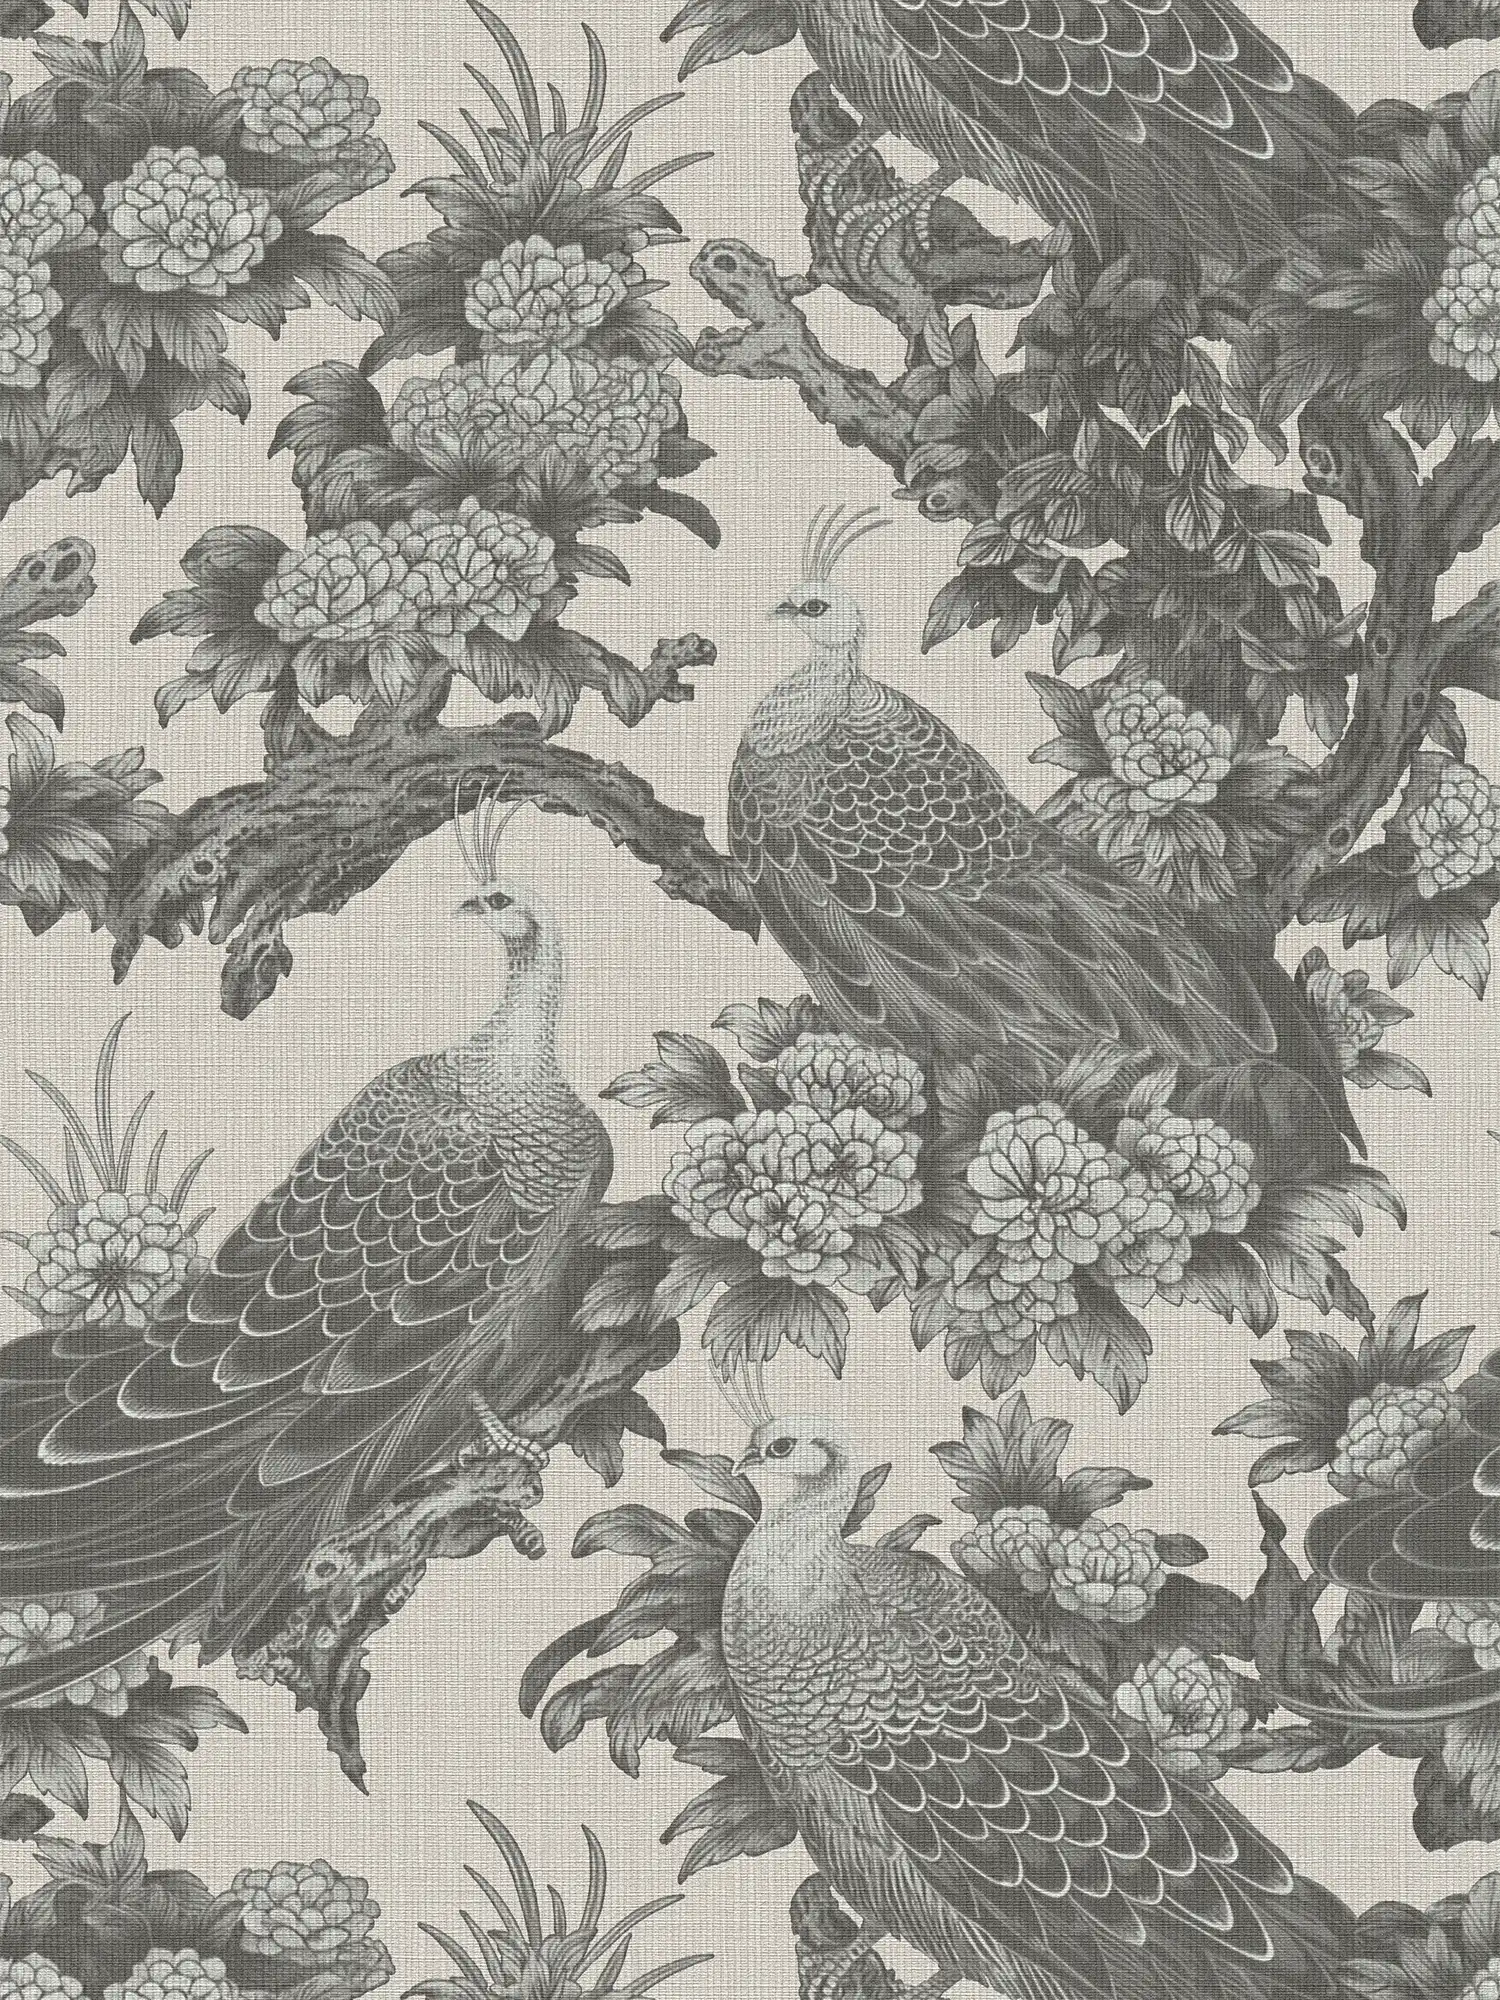 English country style floral pattern with birds as non-woven wallpaper - grey, beige
